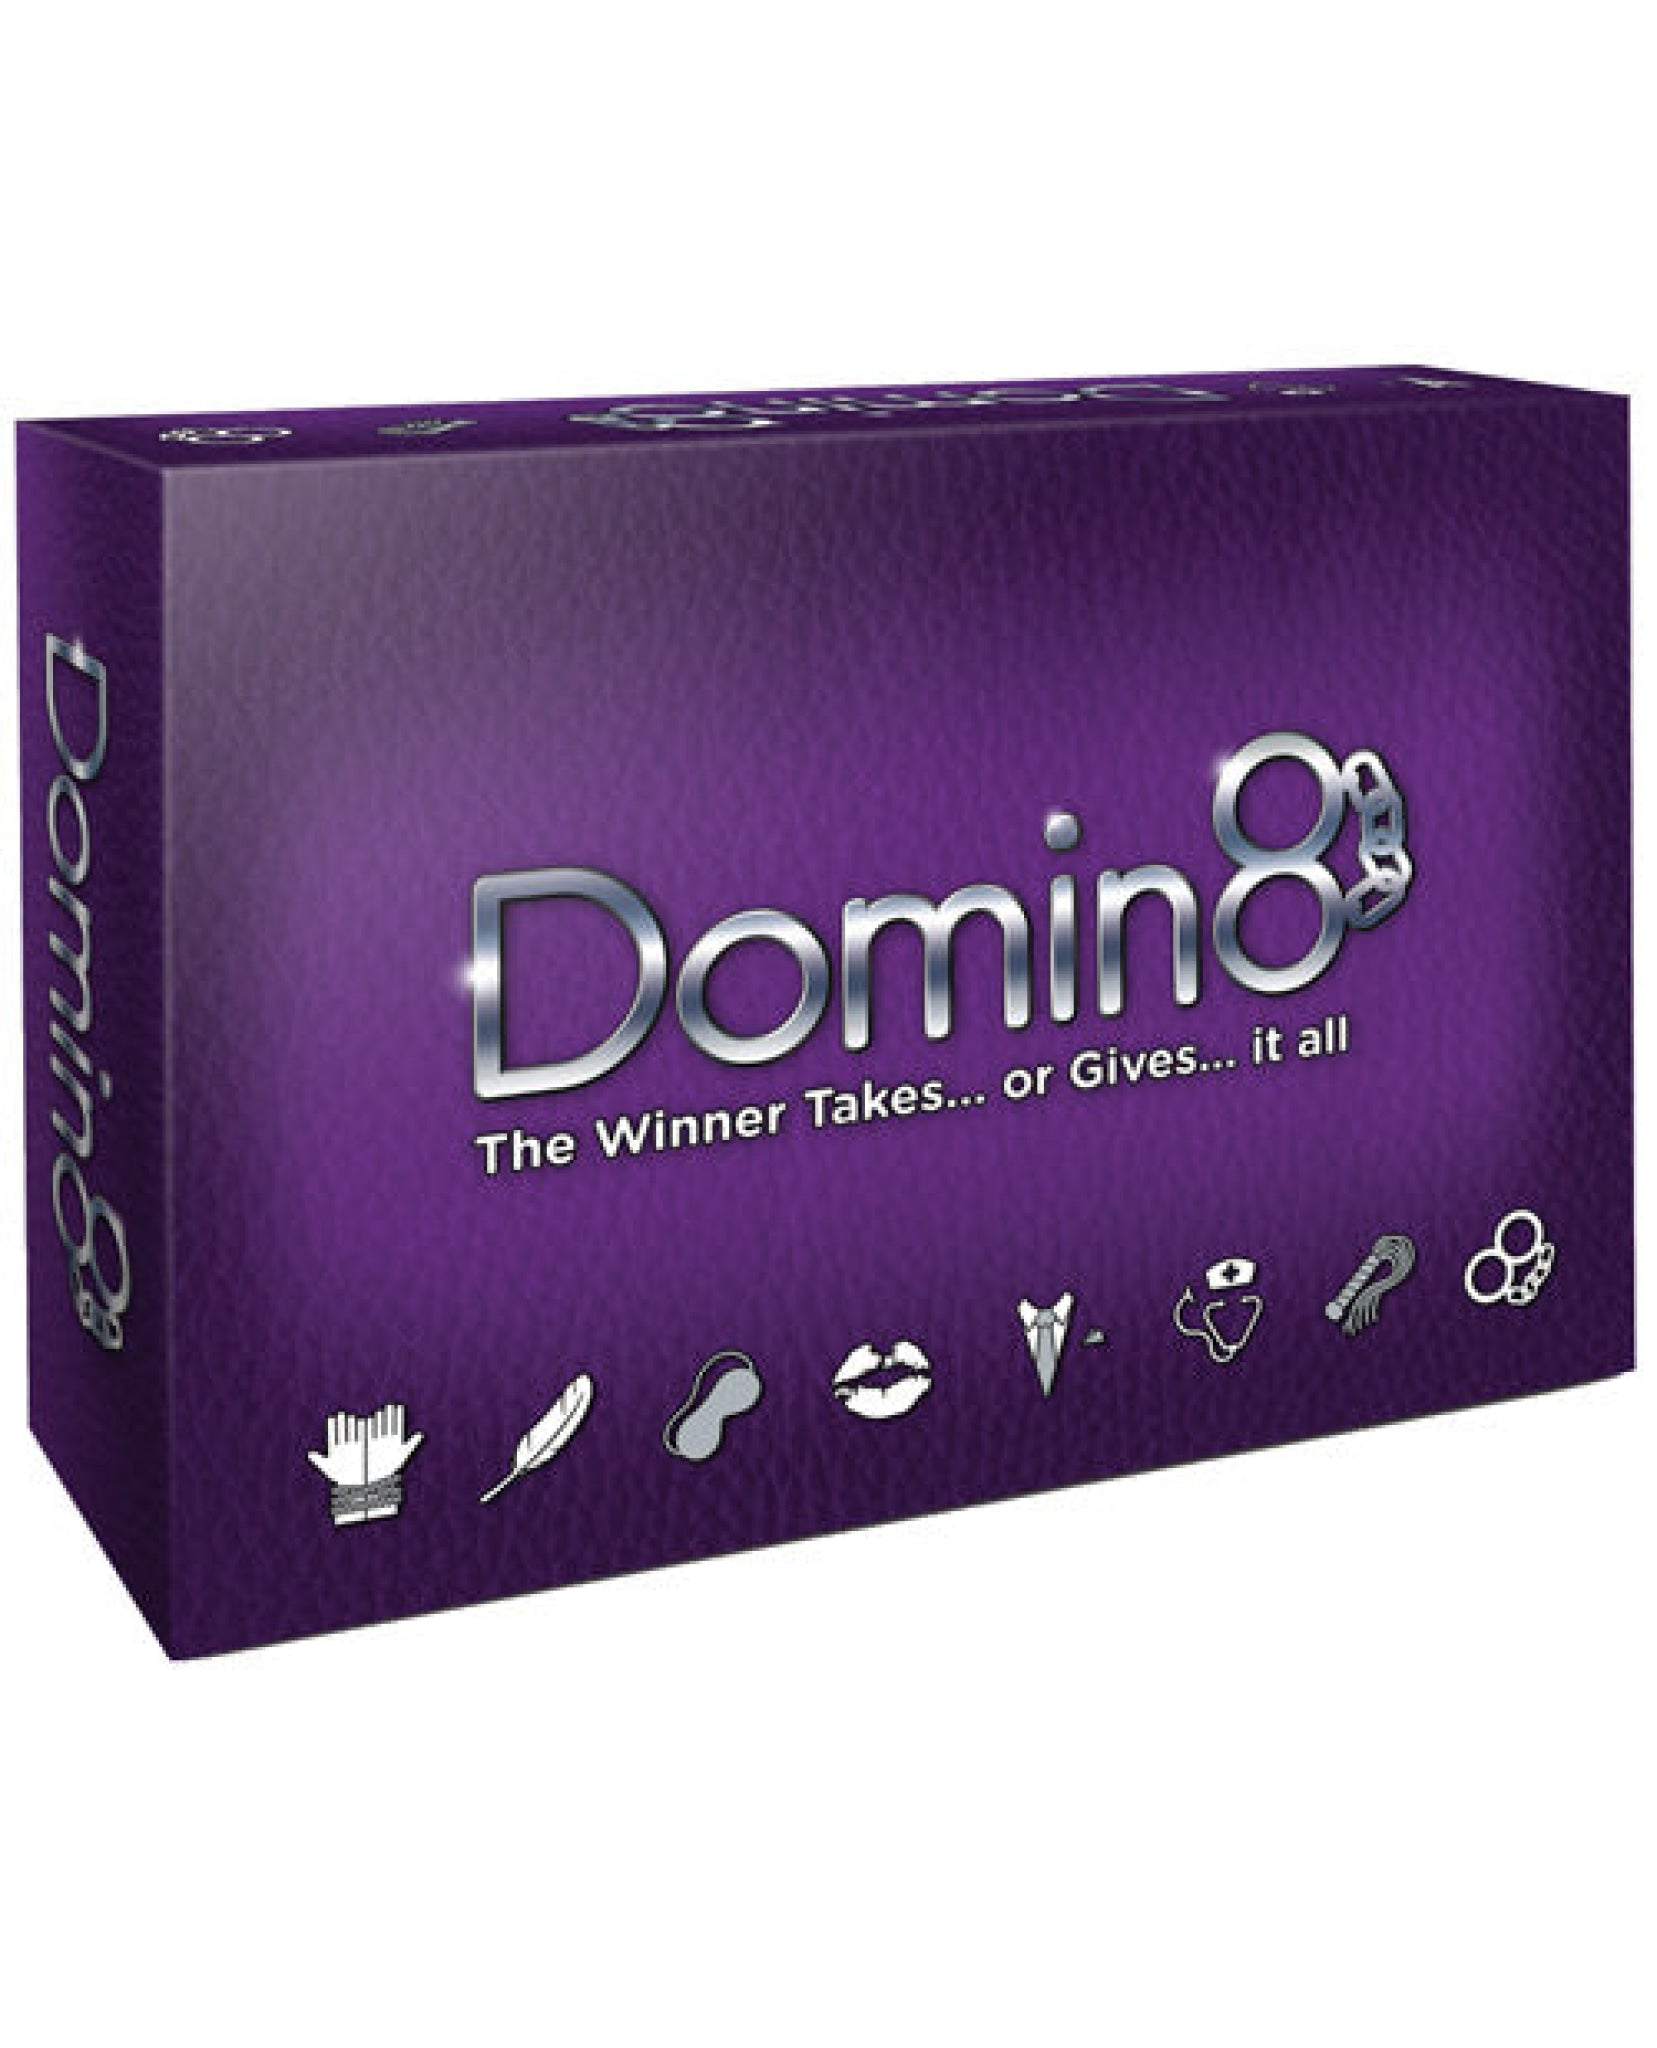 Domin8 Game - The Winner Takes Or Gives All Creative Conceptions